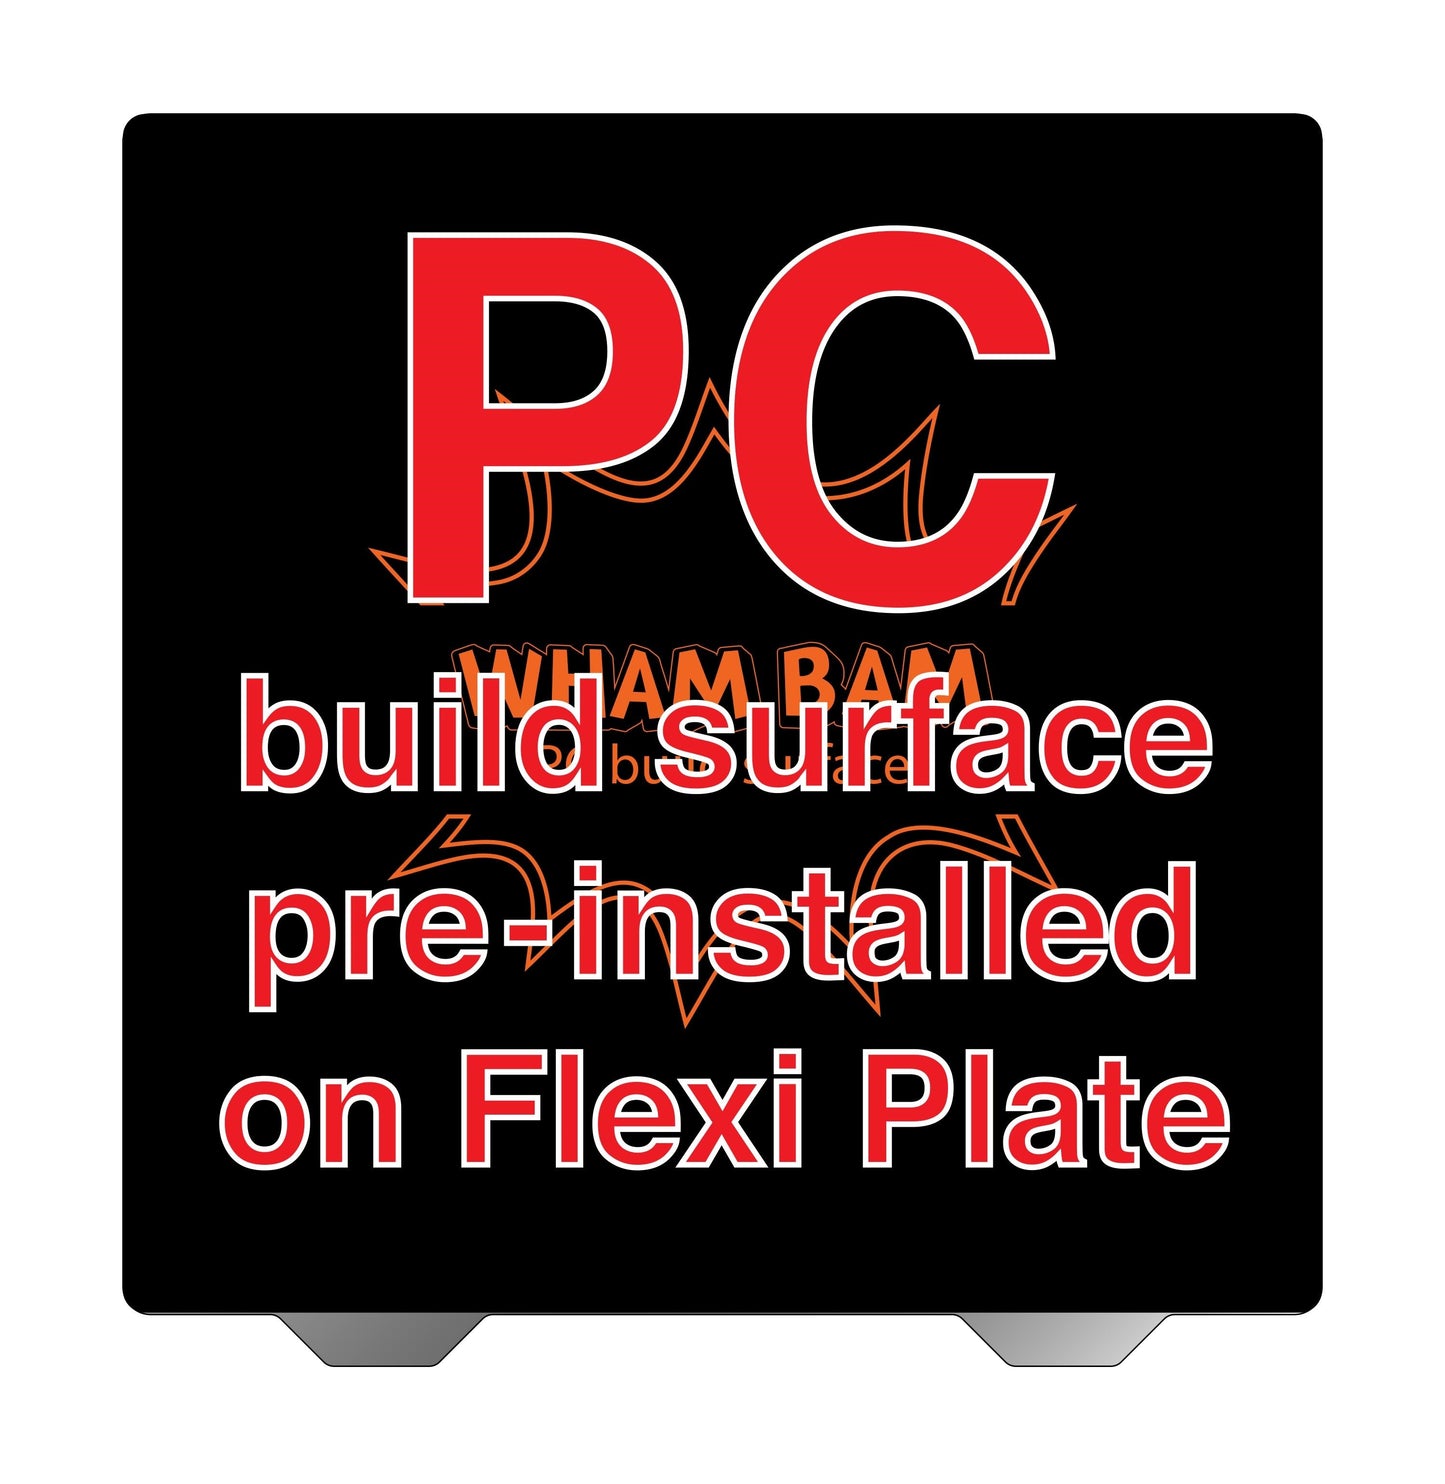 Flexi Plate with Pre-Installed PC Build Surface (Classic Black) - 290 x 290 - Creality Ender 6